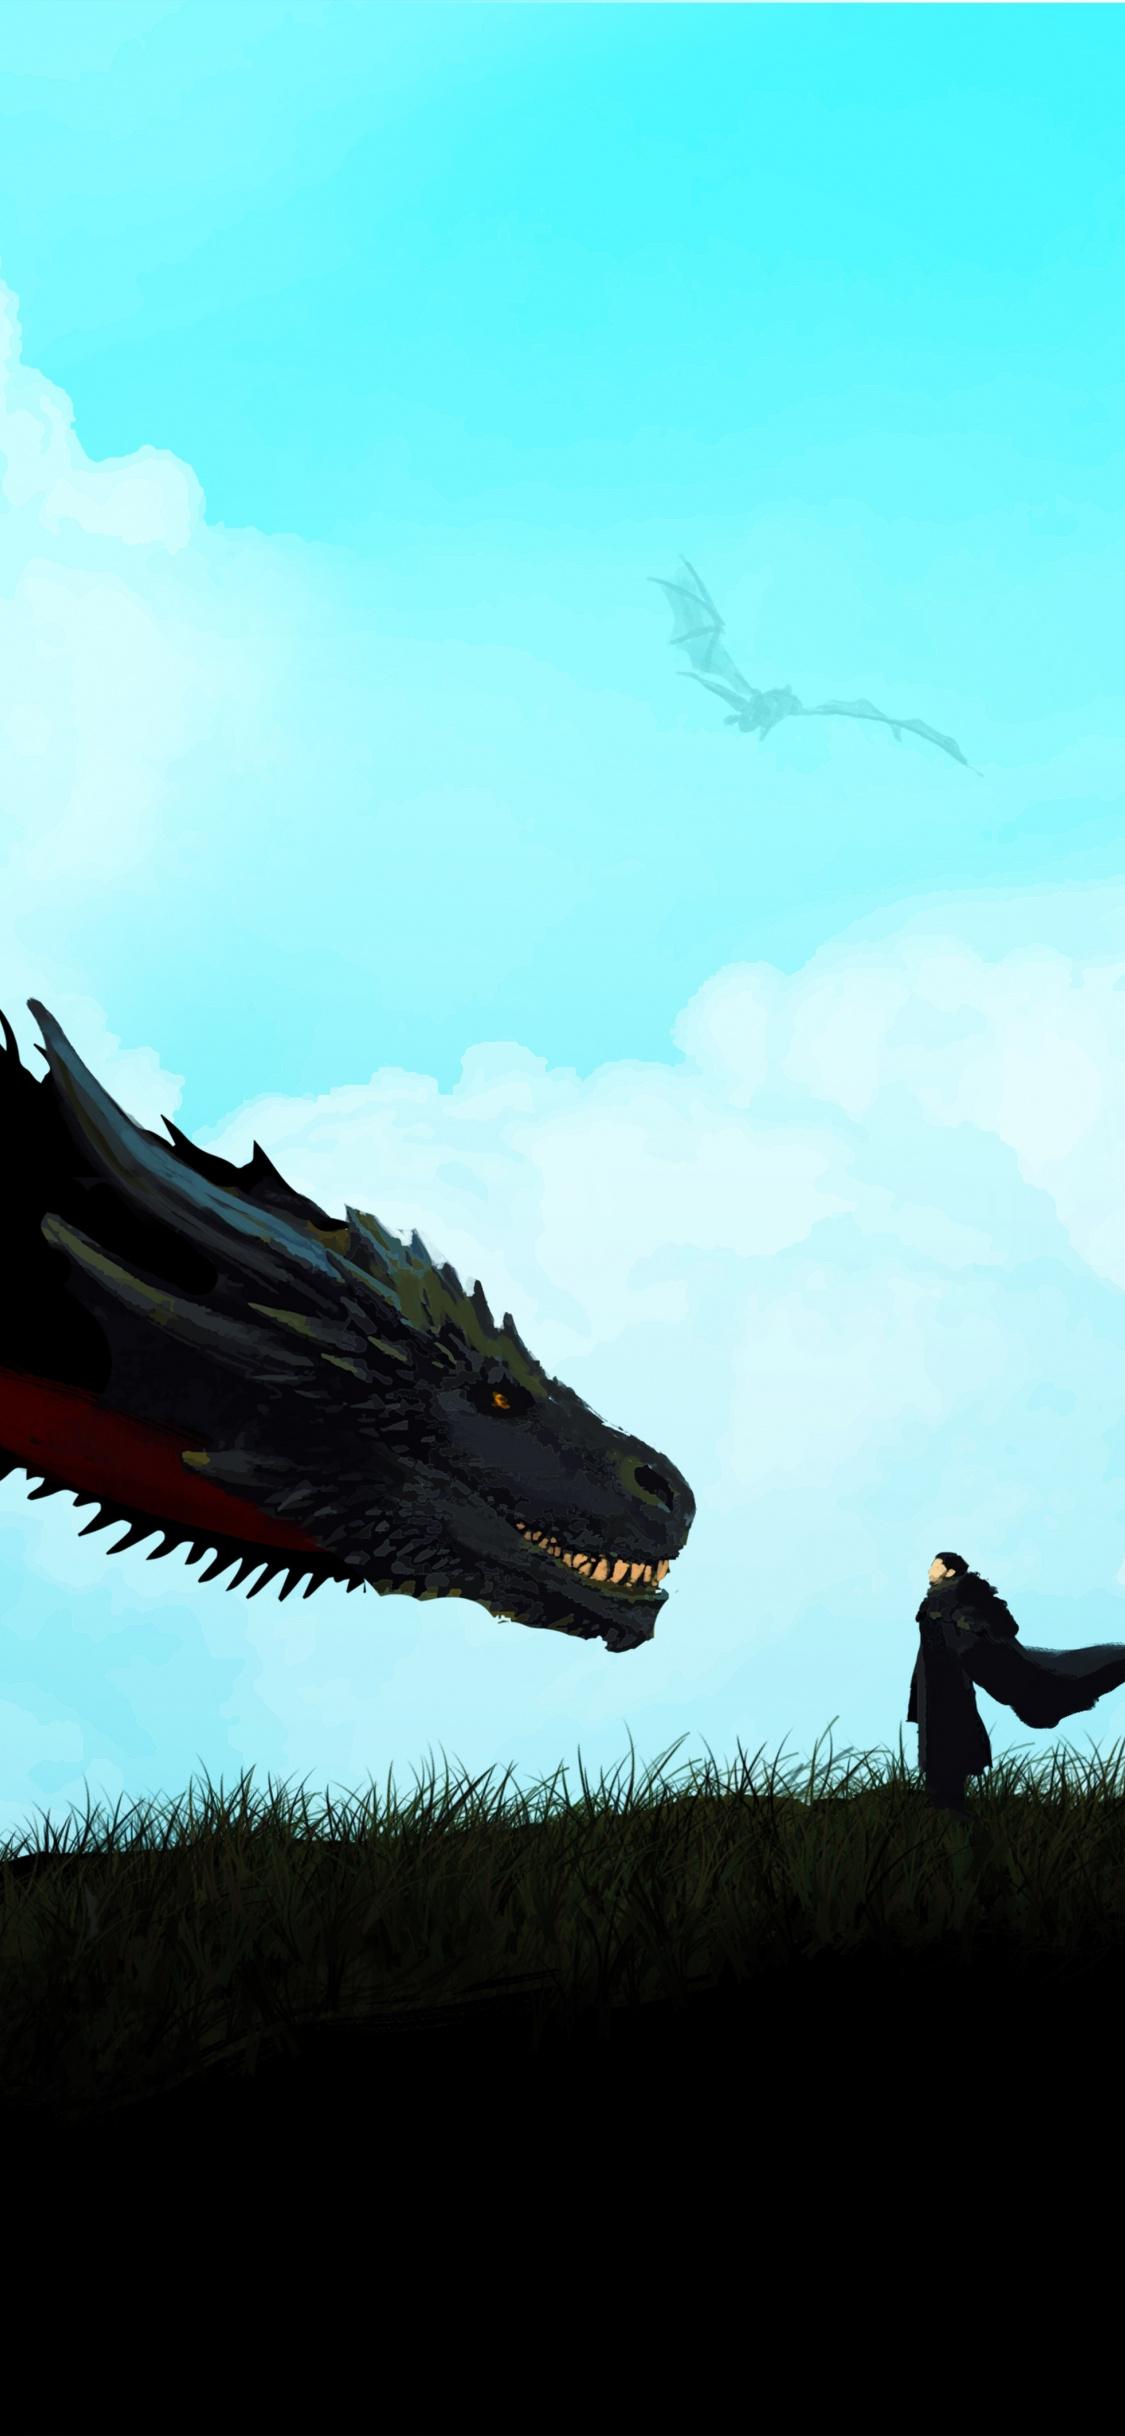 Download 1125x2436 wallpaper jon snow and dragon, game of thrones